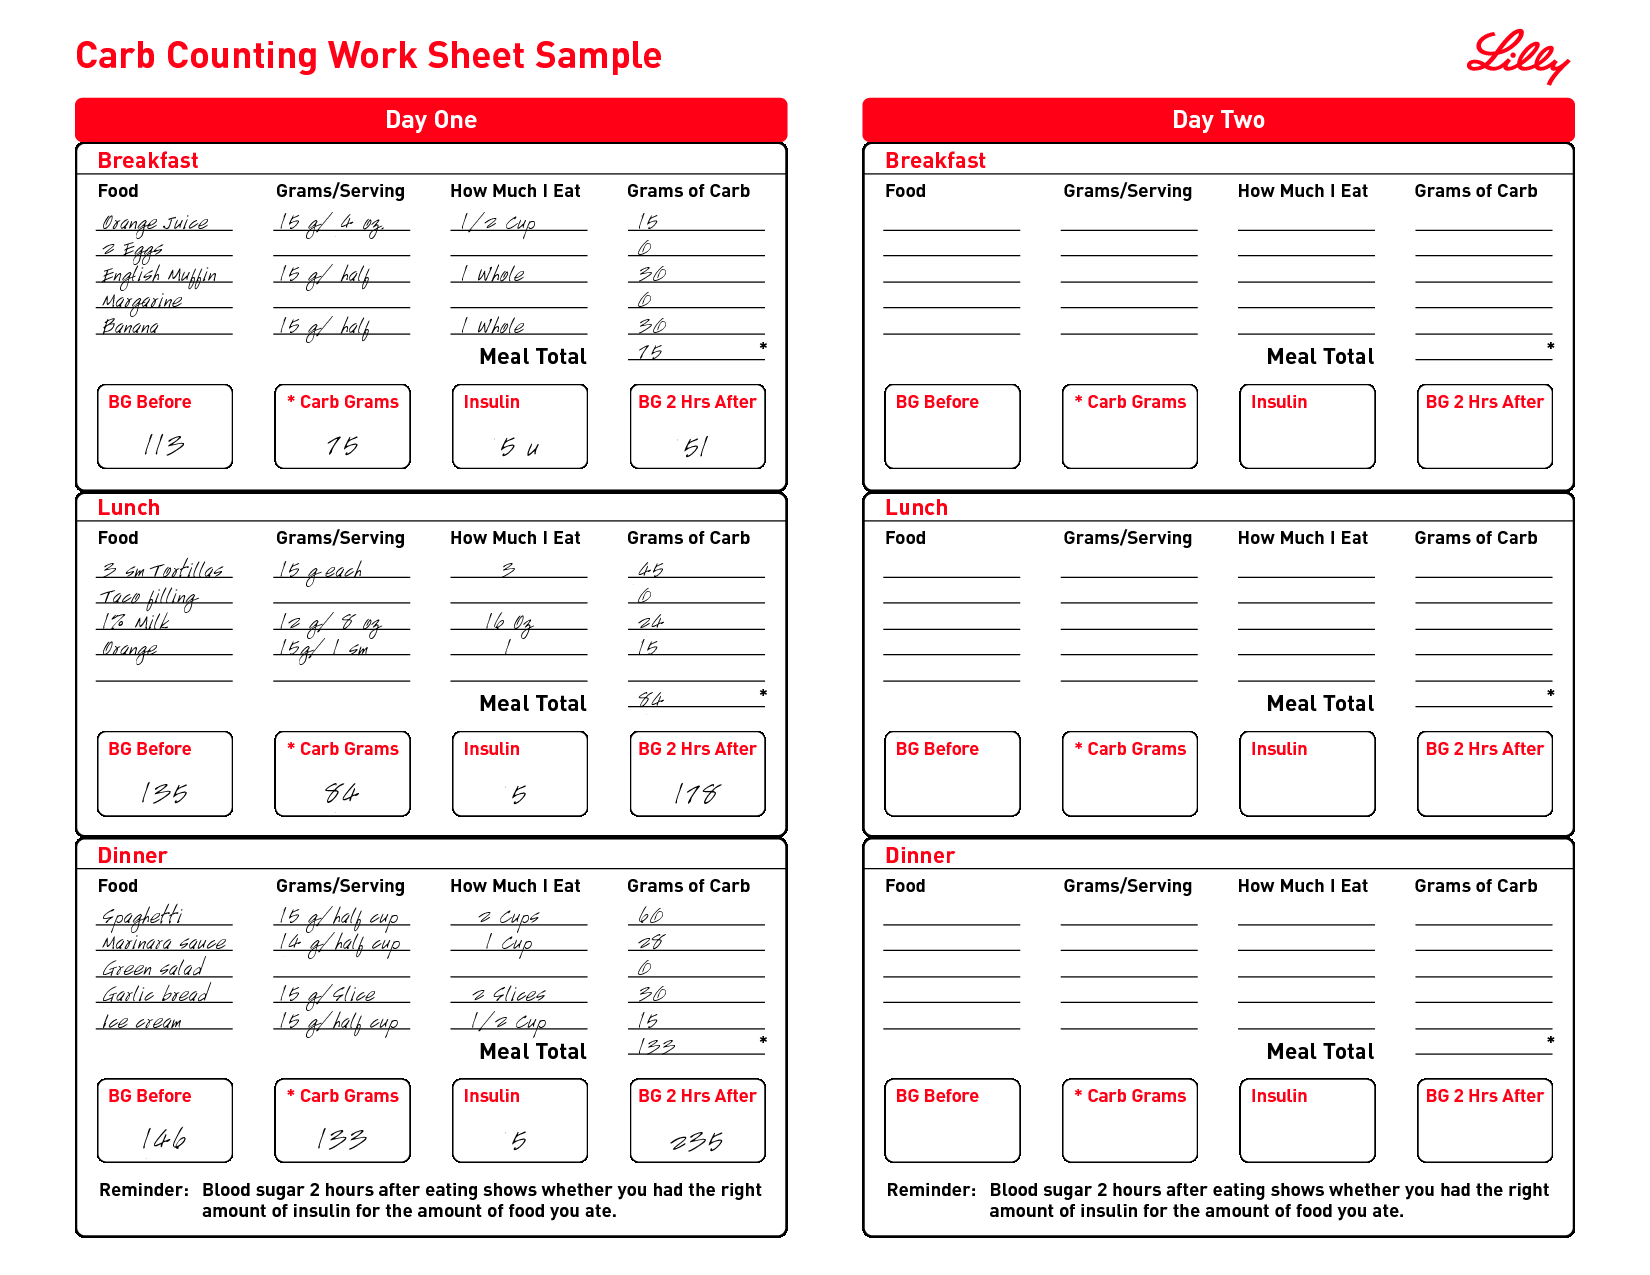 Free Print Carb Counter Chart | Carb Counting Work Sheet Sample 